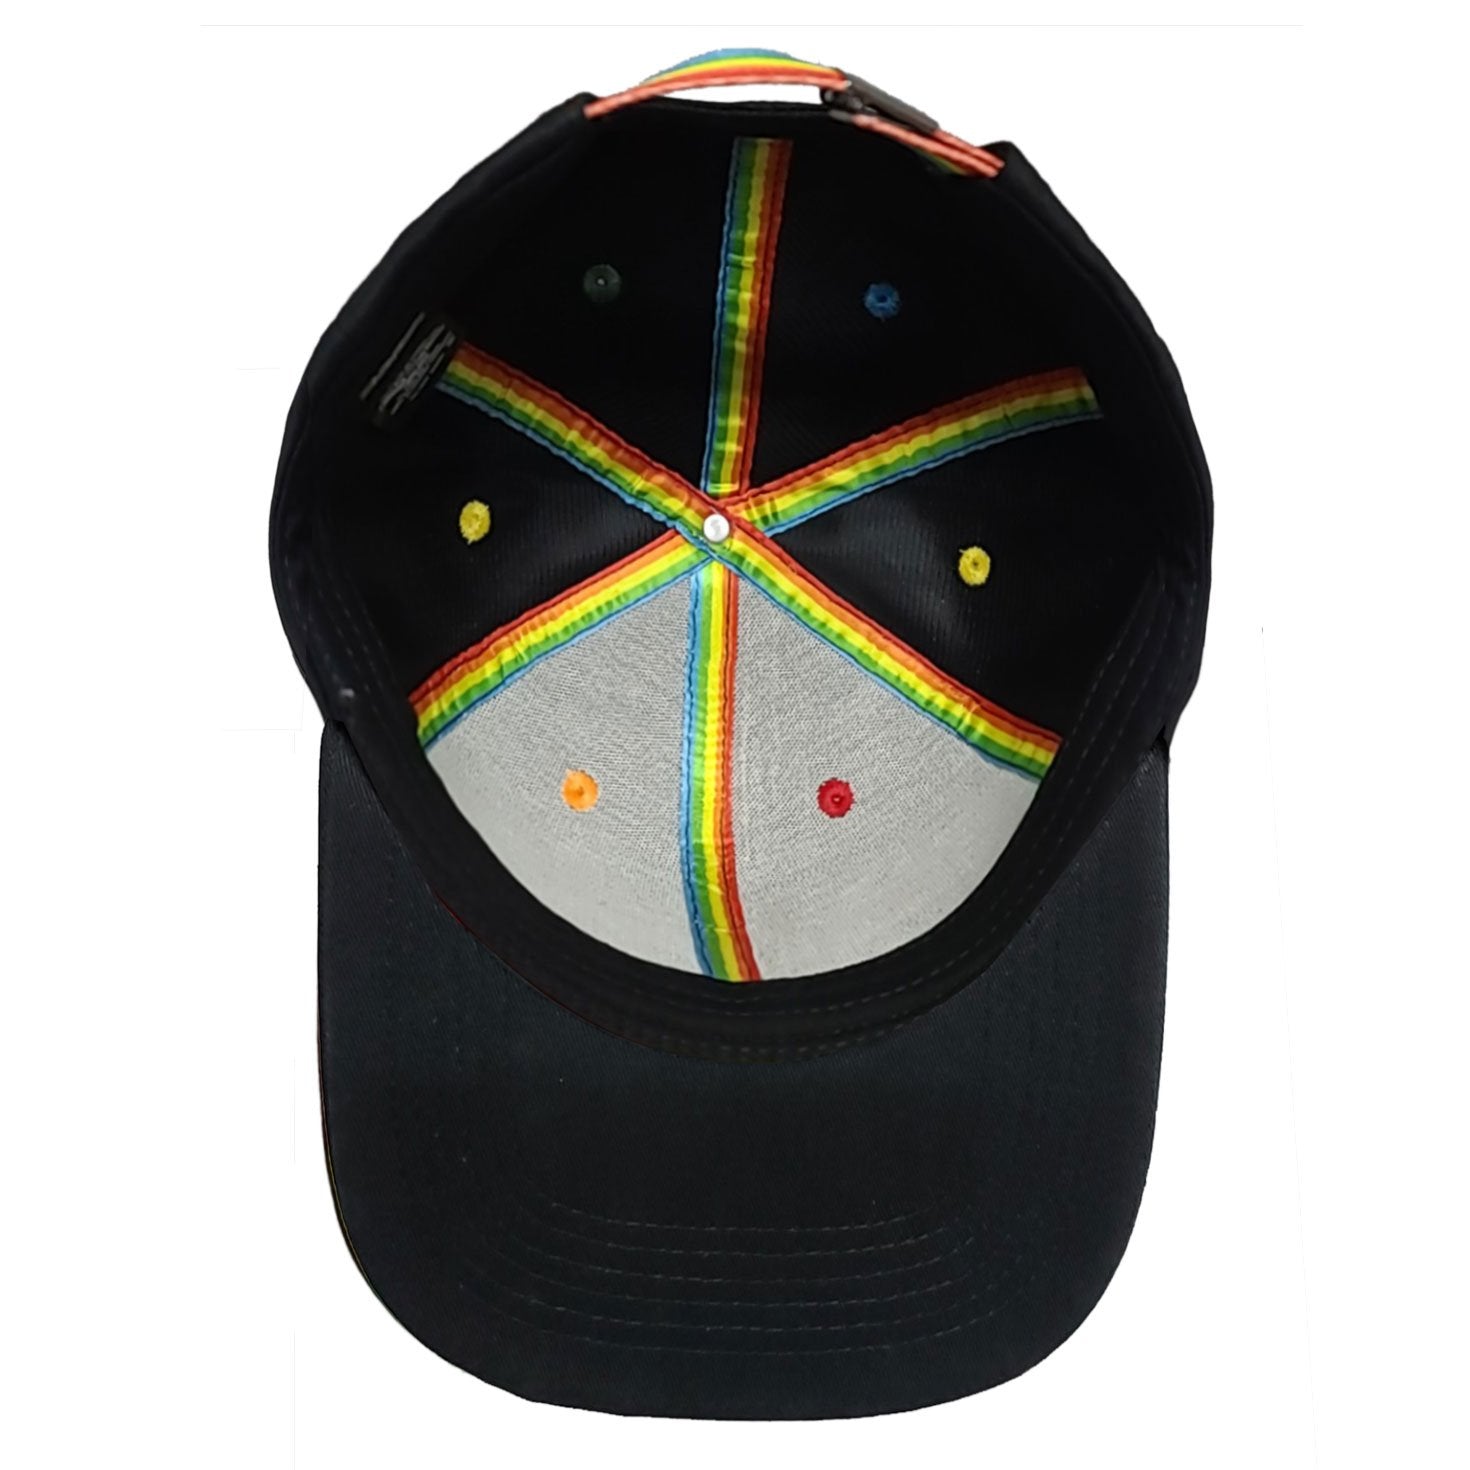 River Raiders Patch Cap, Atari Cartridge Design with Activision Rainbow Lining and Details